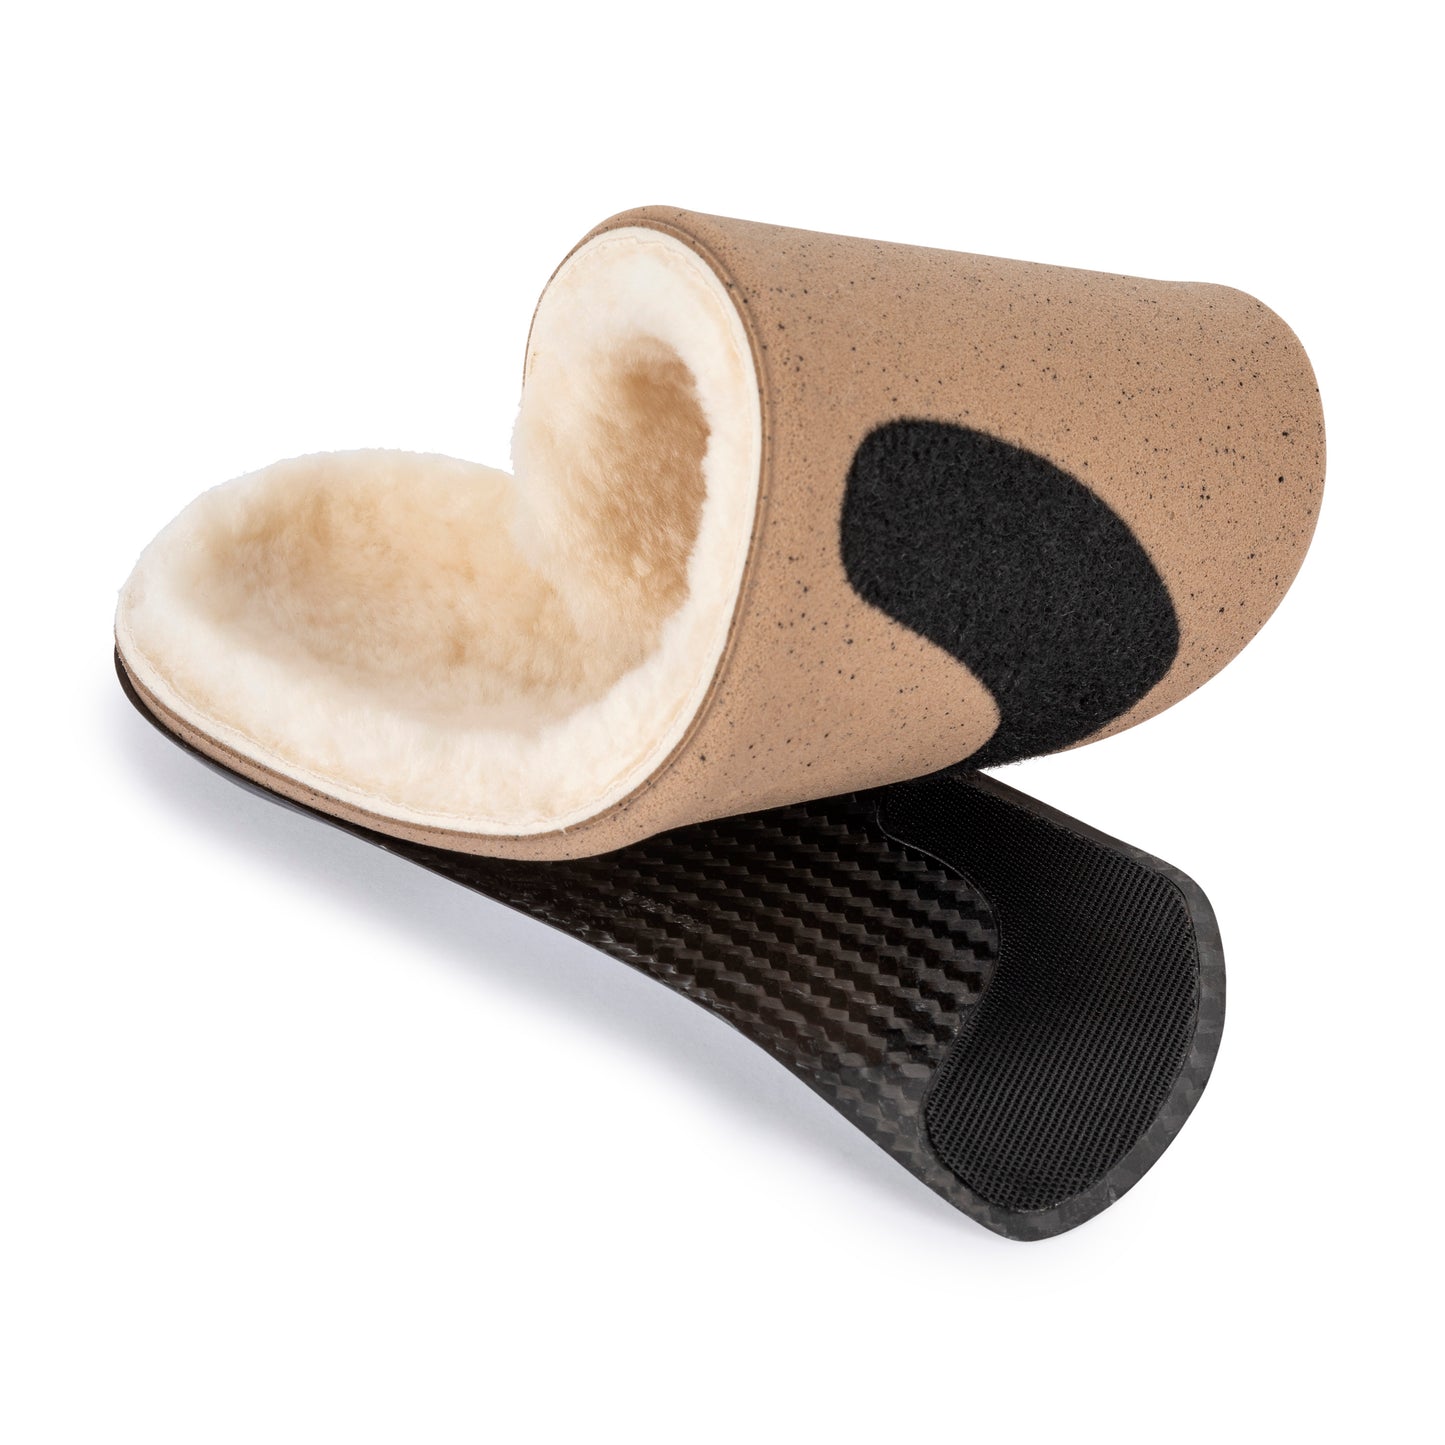 Shearling replacement top covers for Dash orthotic insoles by Tread Labs